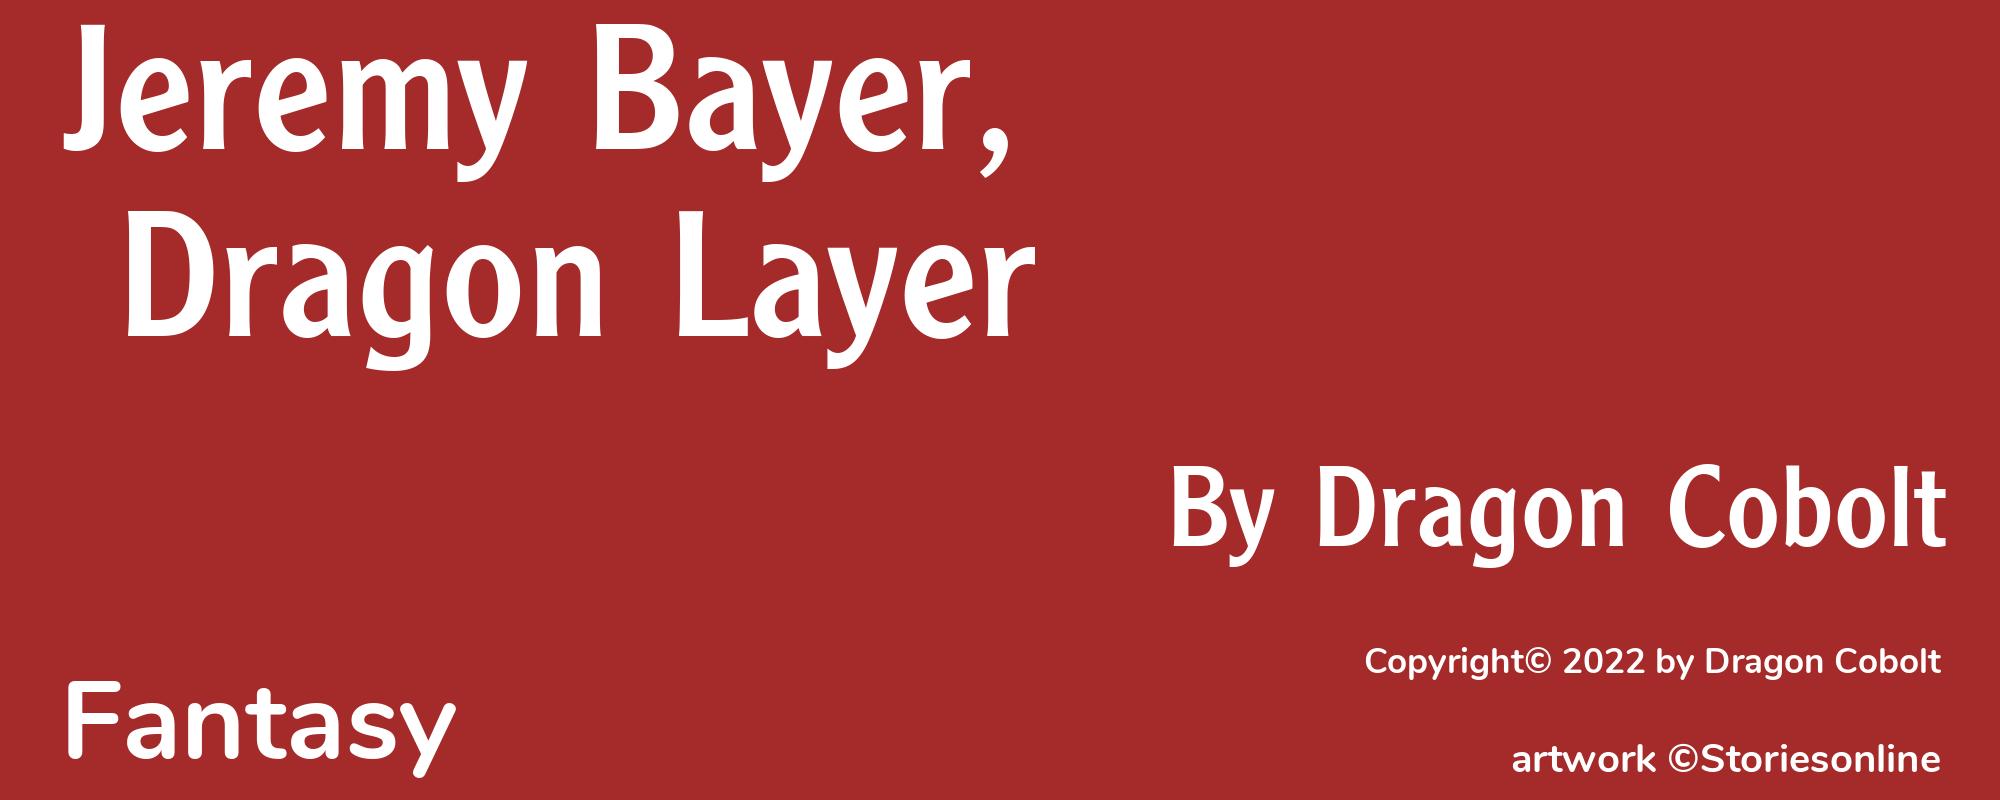 Jeremy Bayer, Dragon Layer - Cover